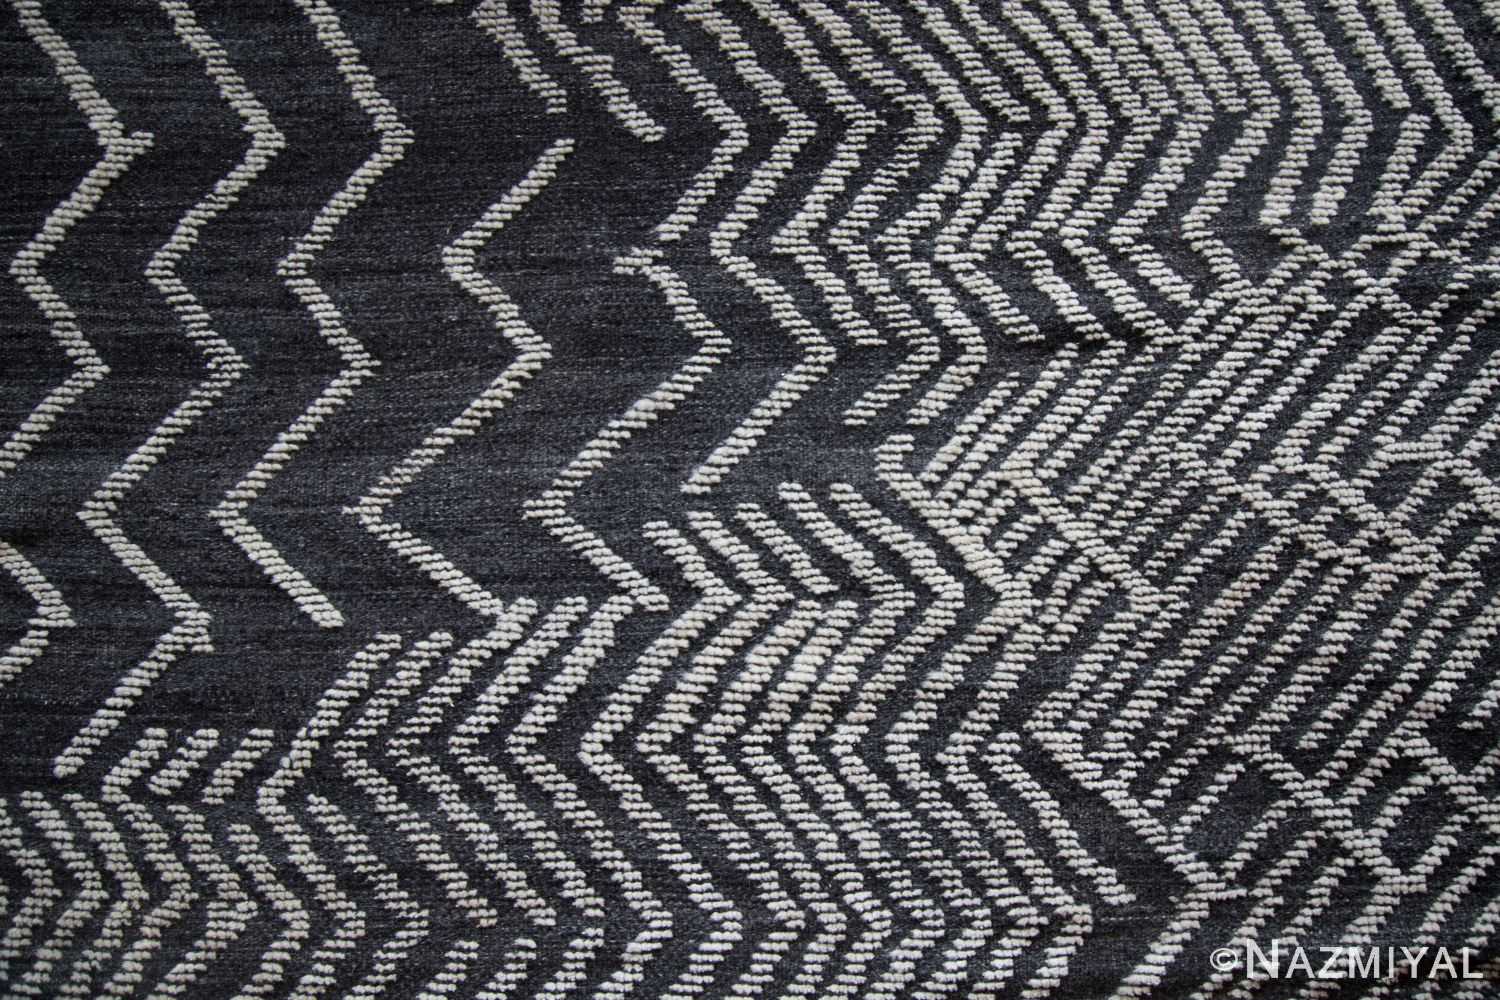 Texture Of Modernist Collection Rug 172786334 by Nazmiyal NYC